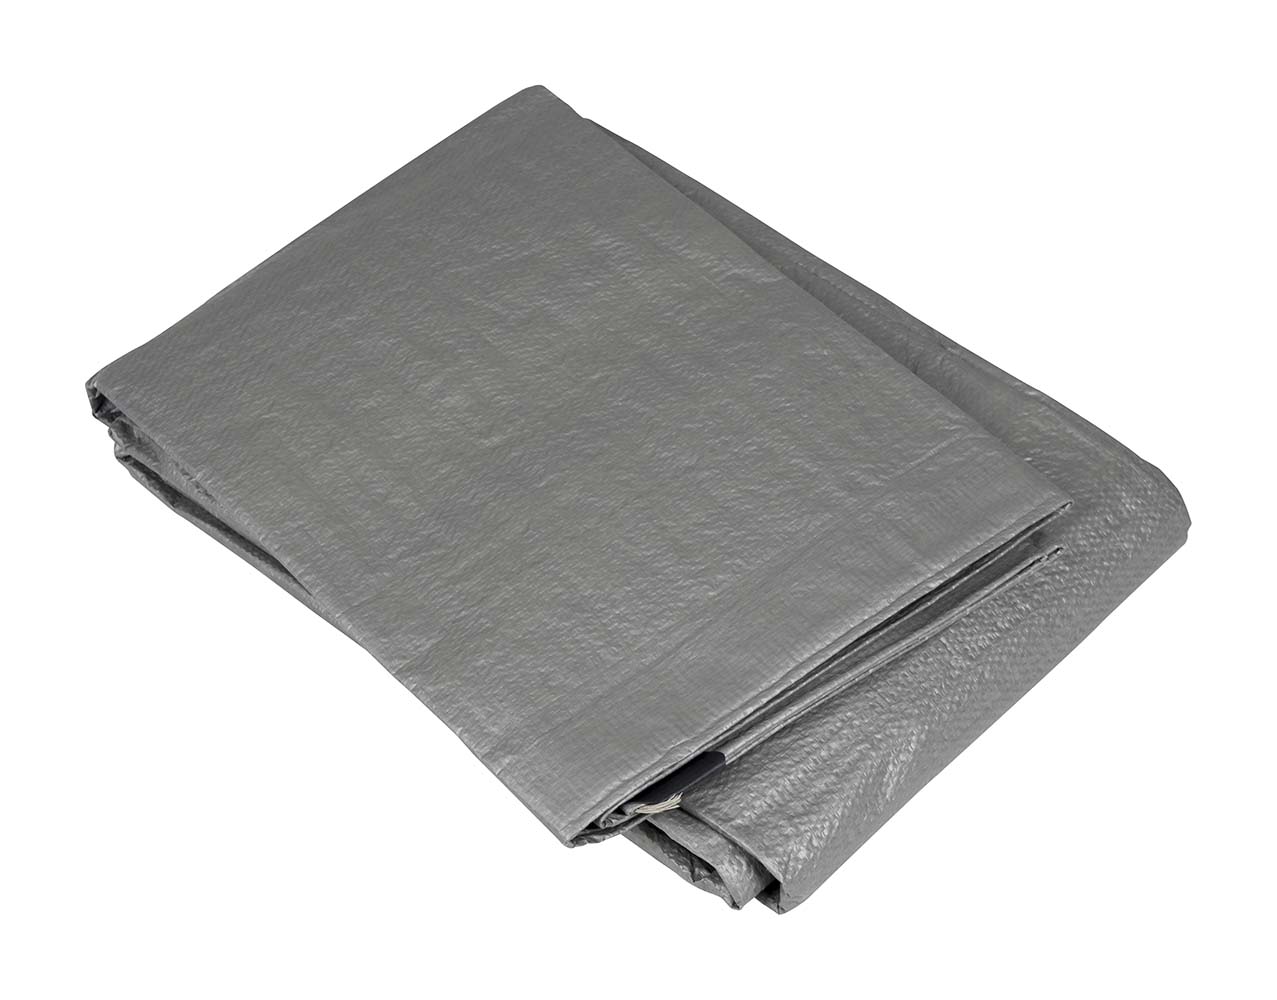 4215850 A sturdy cover sail. This sail is water proof, weather proof and high quality (120 gr/m²). With welded seams, reinforced edges and sturdy eyelets.